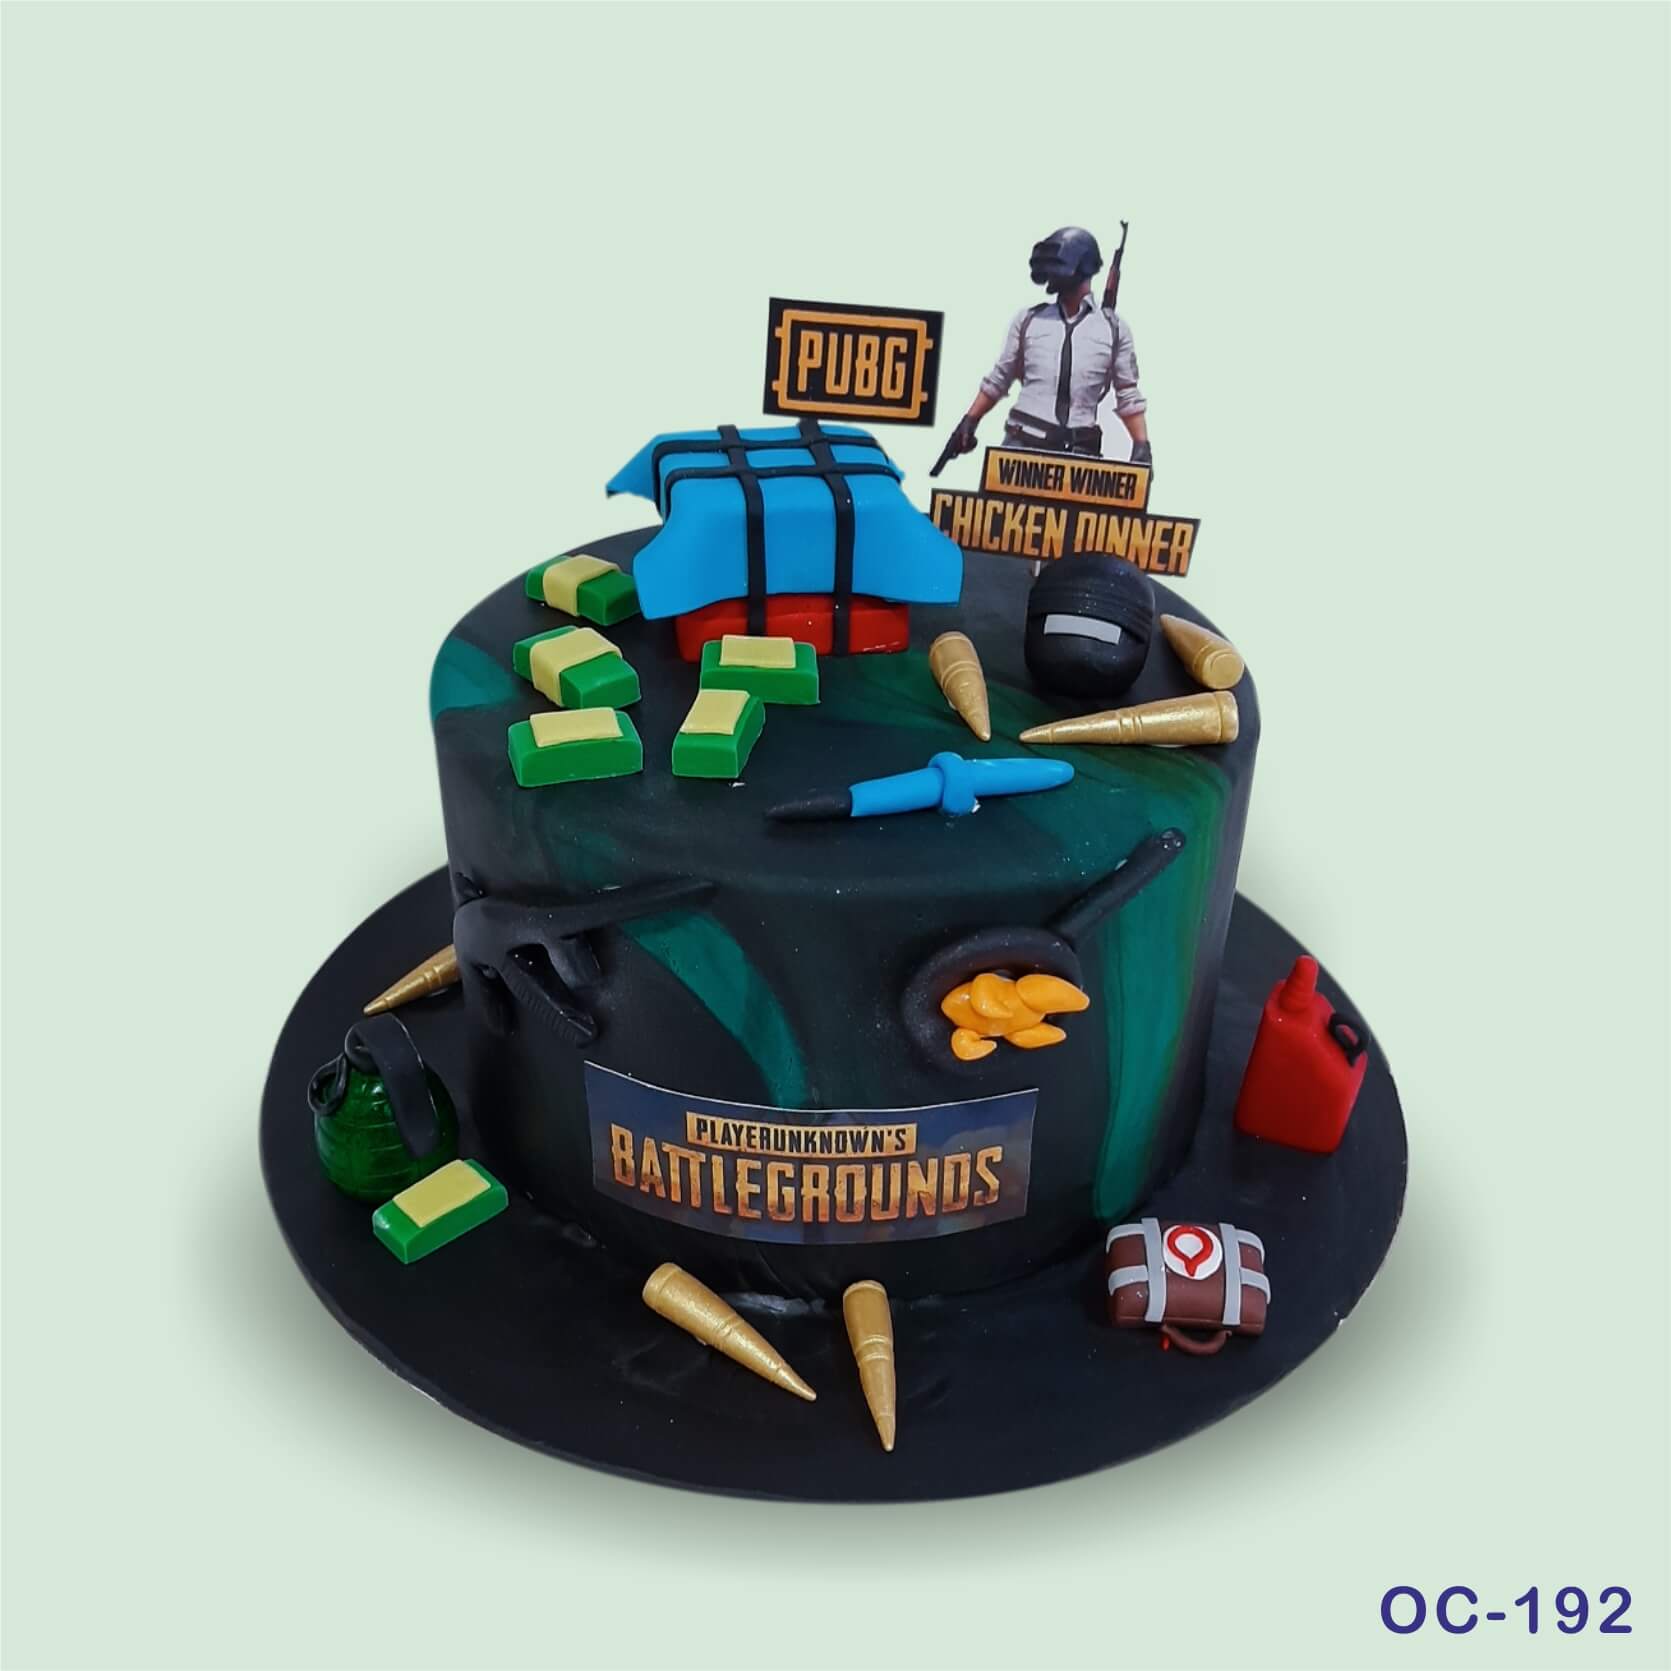 PUBG mobile cakes: Where you can order them